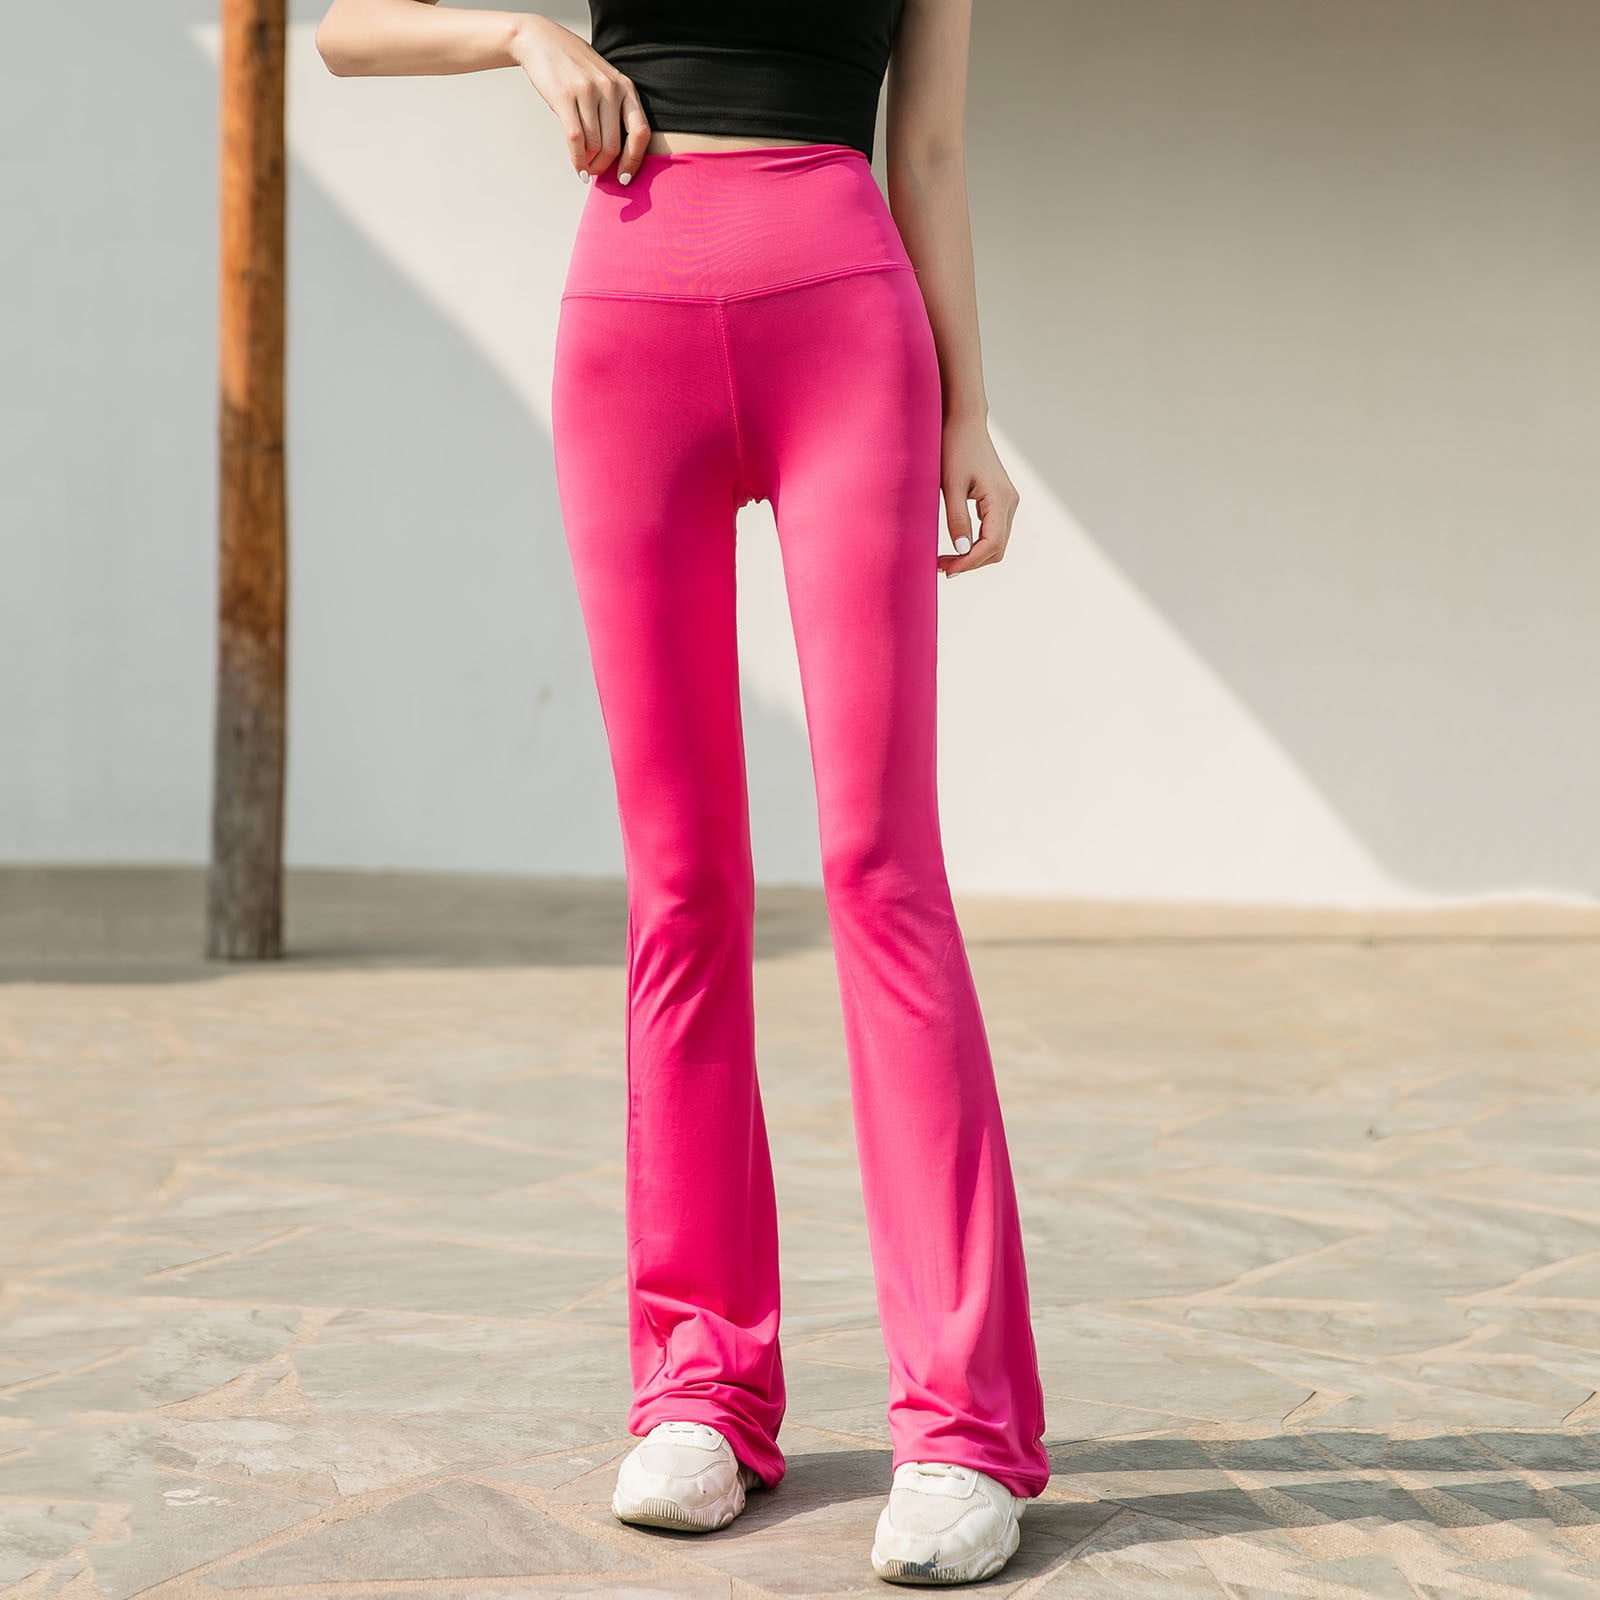 HTNBO Knitted Bell Bottom Pants for Women High Waisted Casual Elastic Waist  Long Flared Trousers